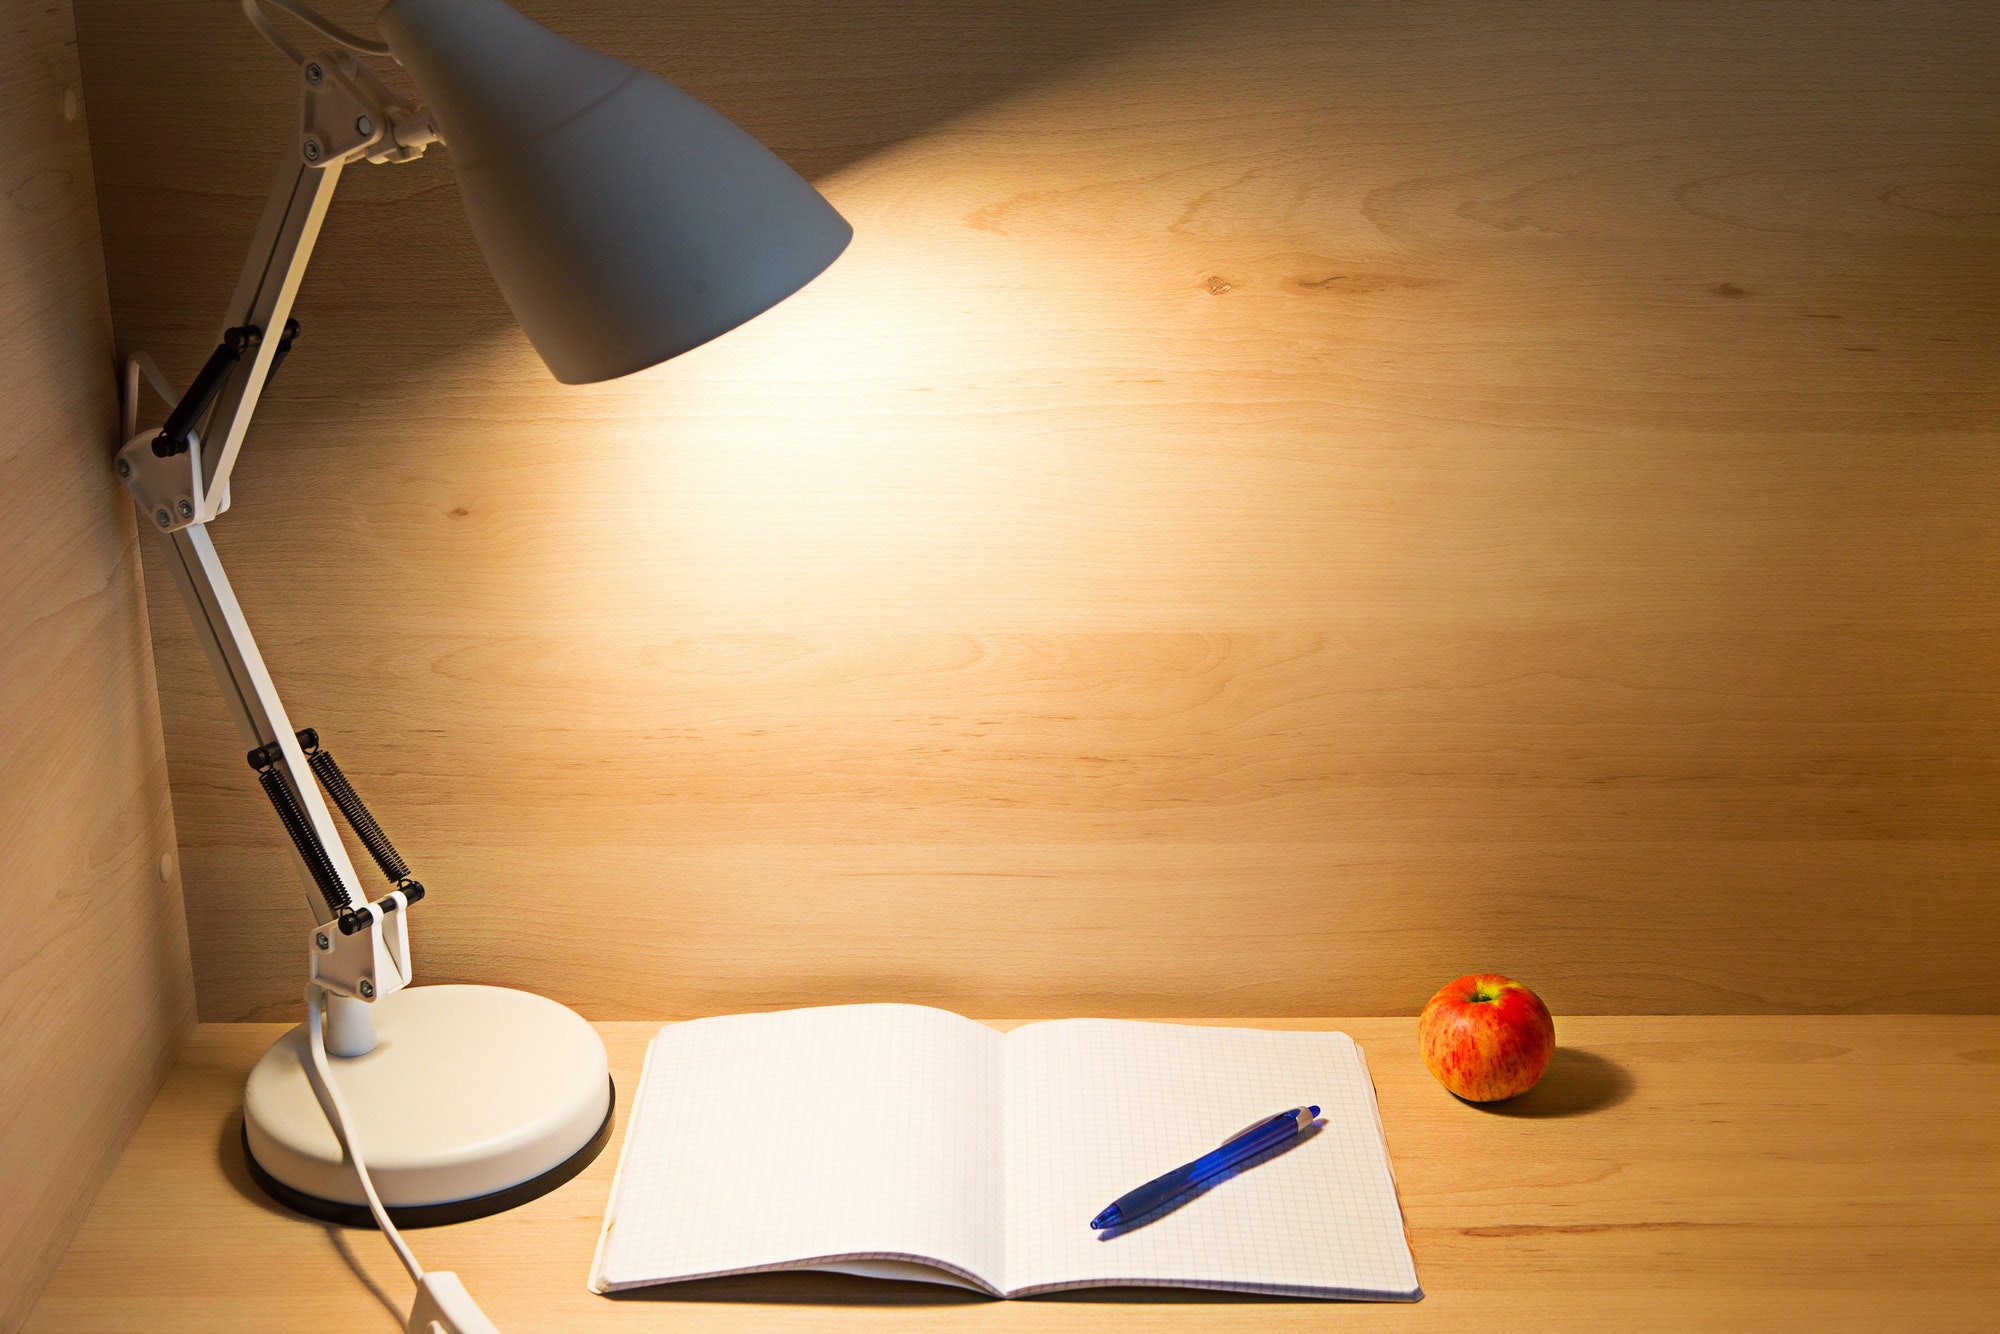 Table lamp in the loft style at the workplace at home